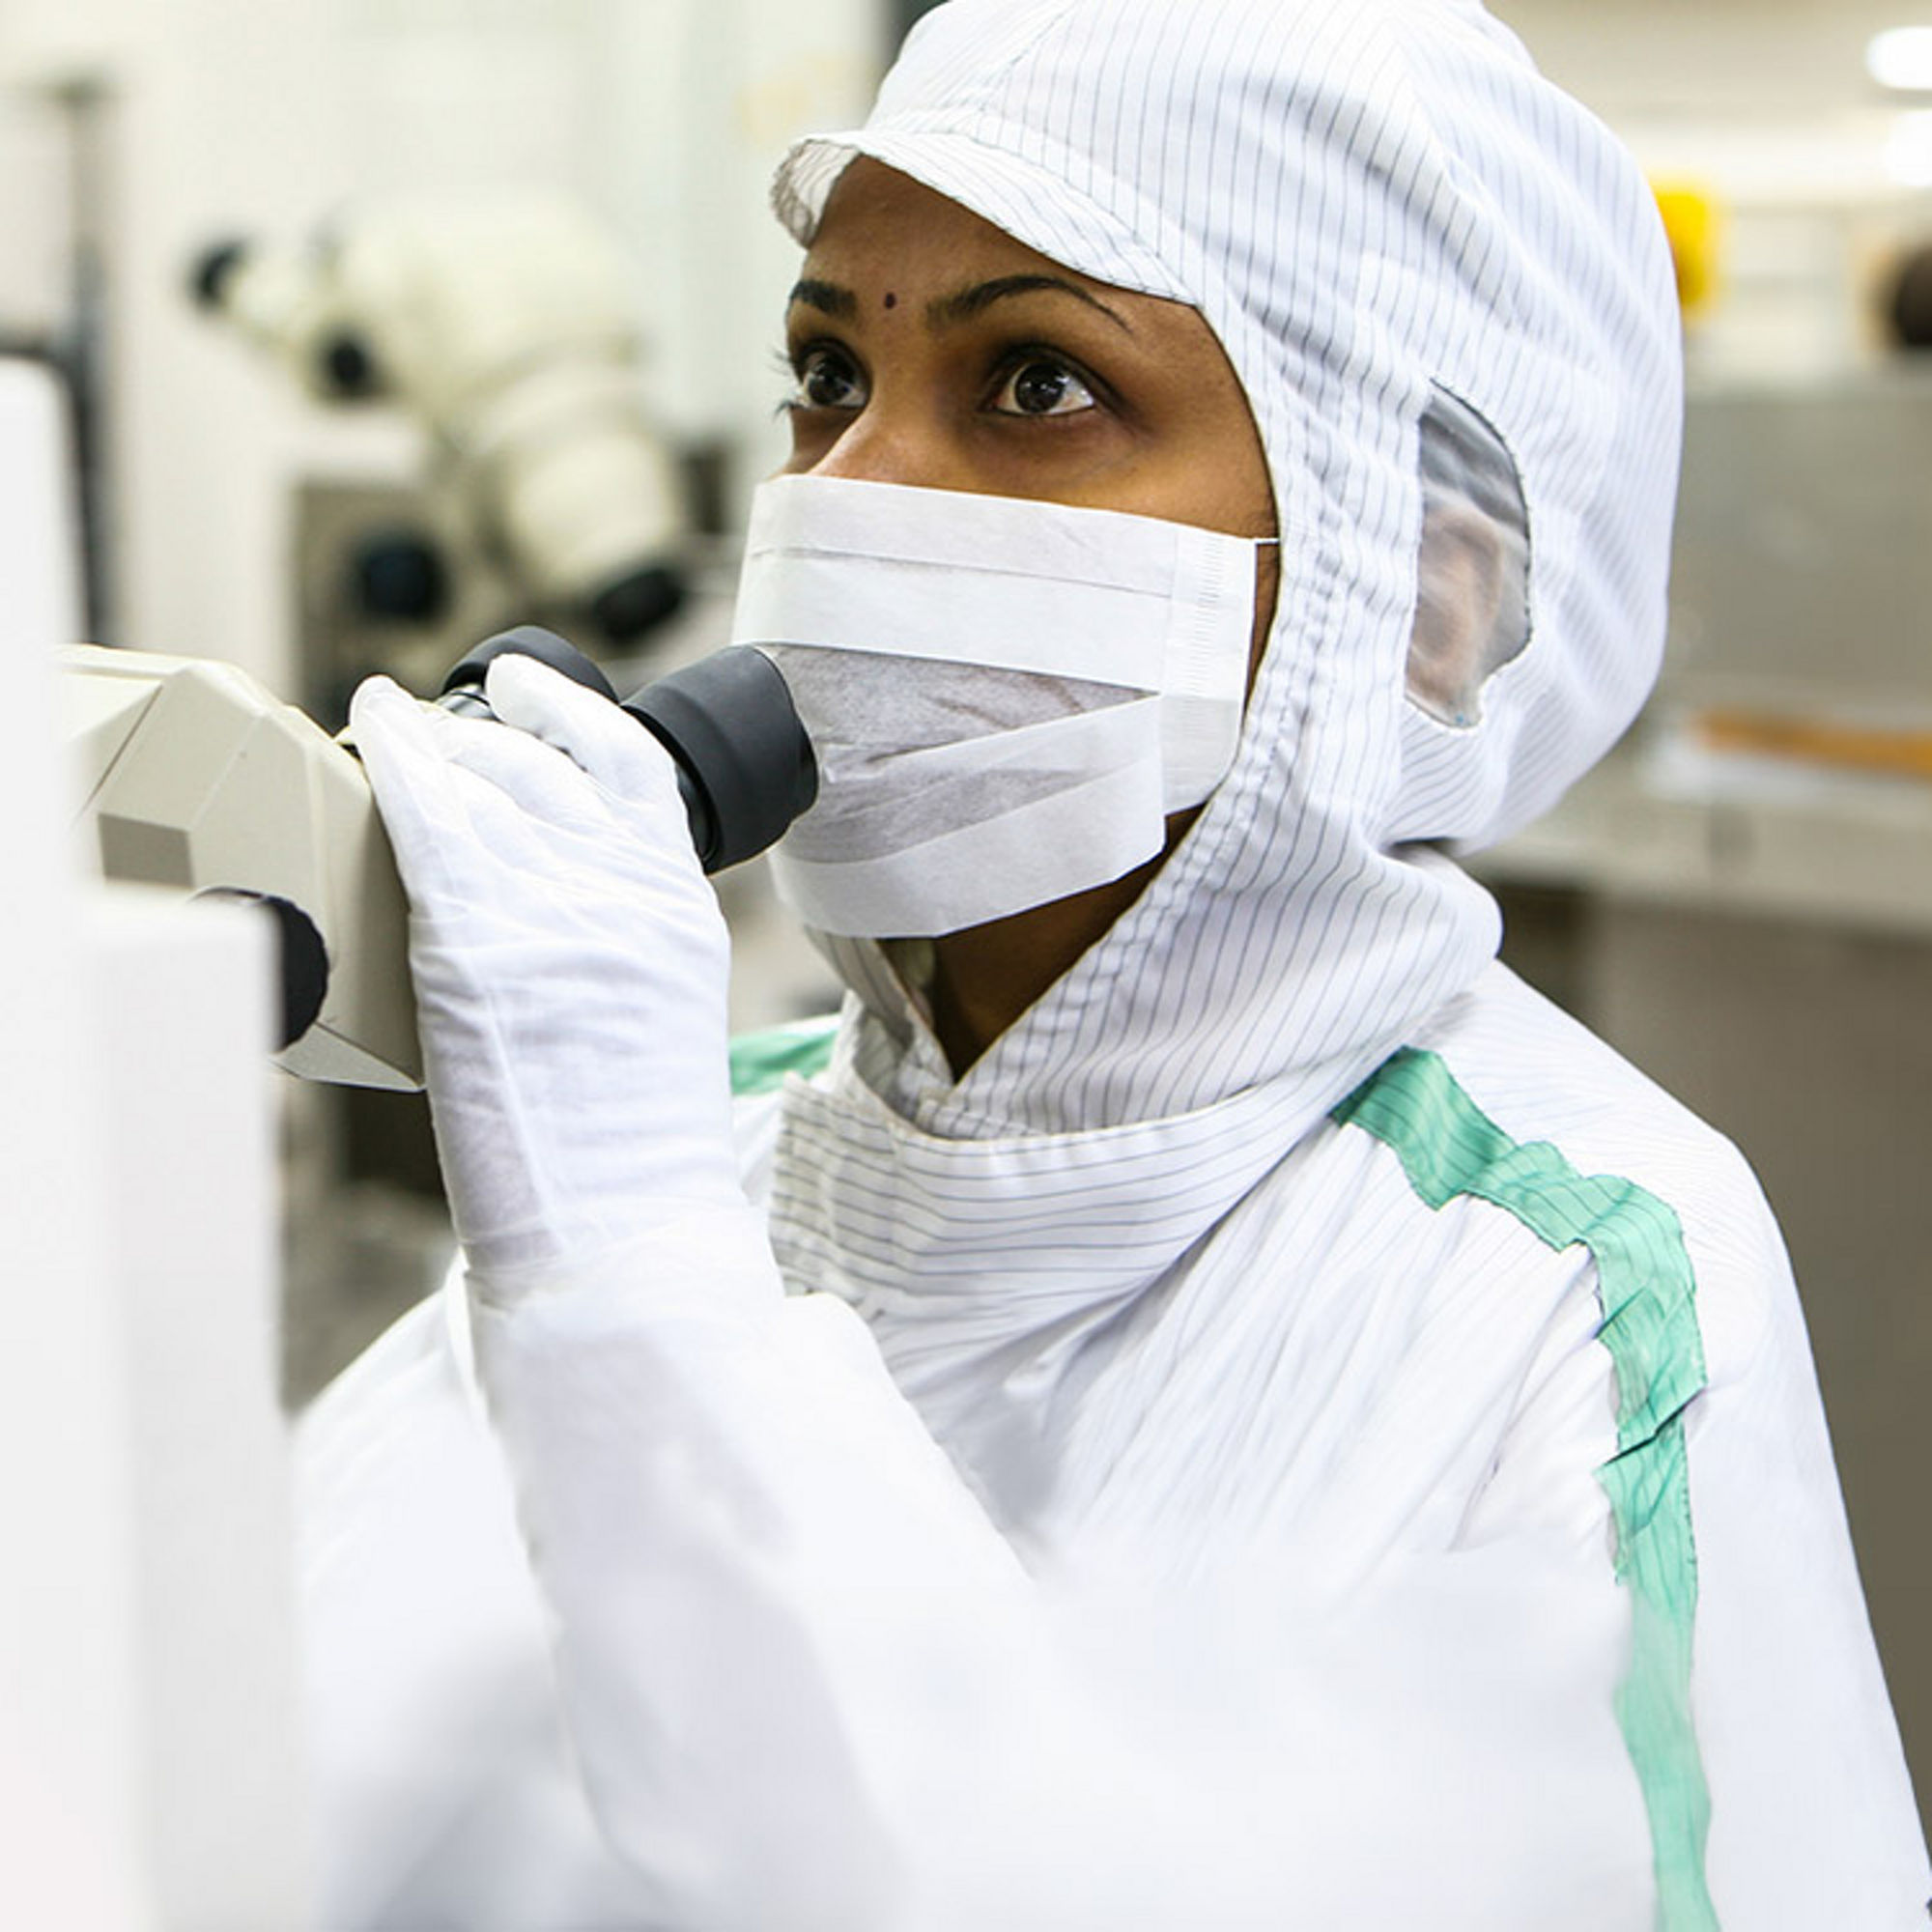 A woman in a cleanroom suit handling equipment in a laboratory setting